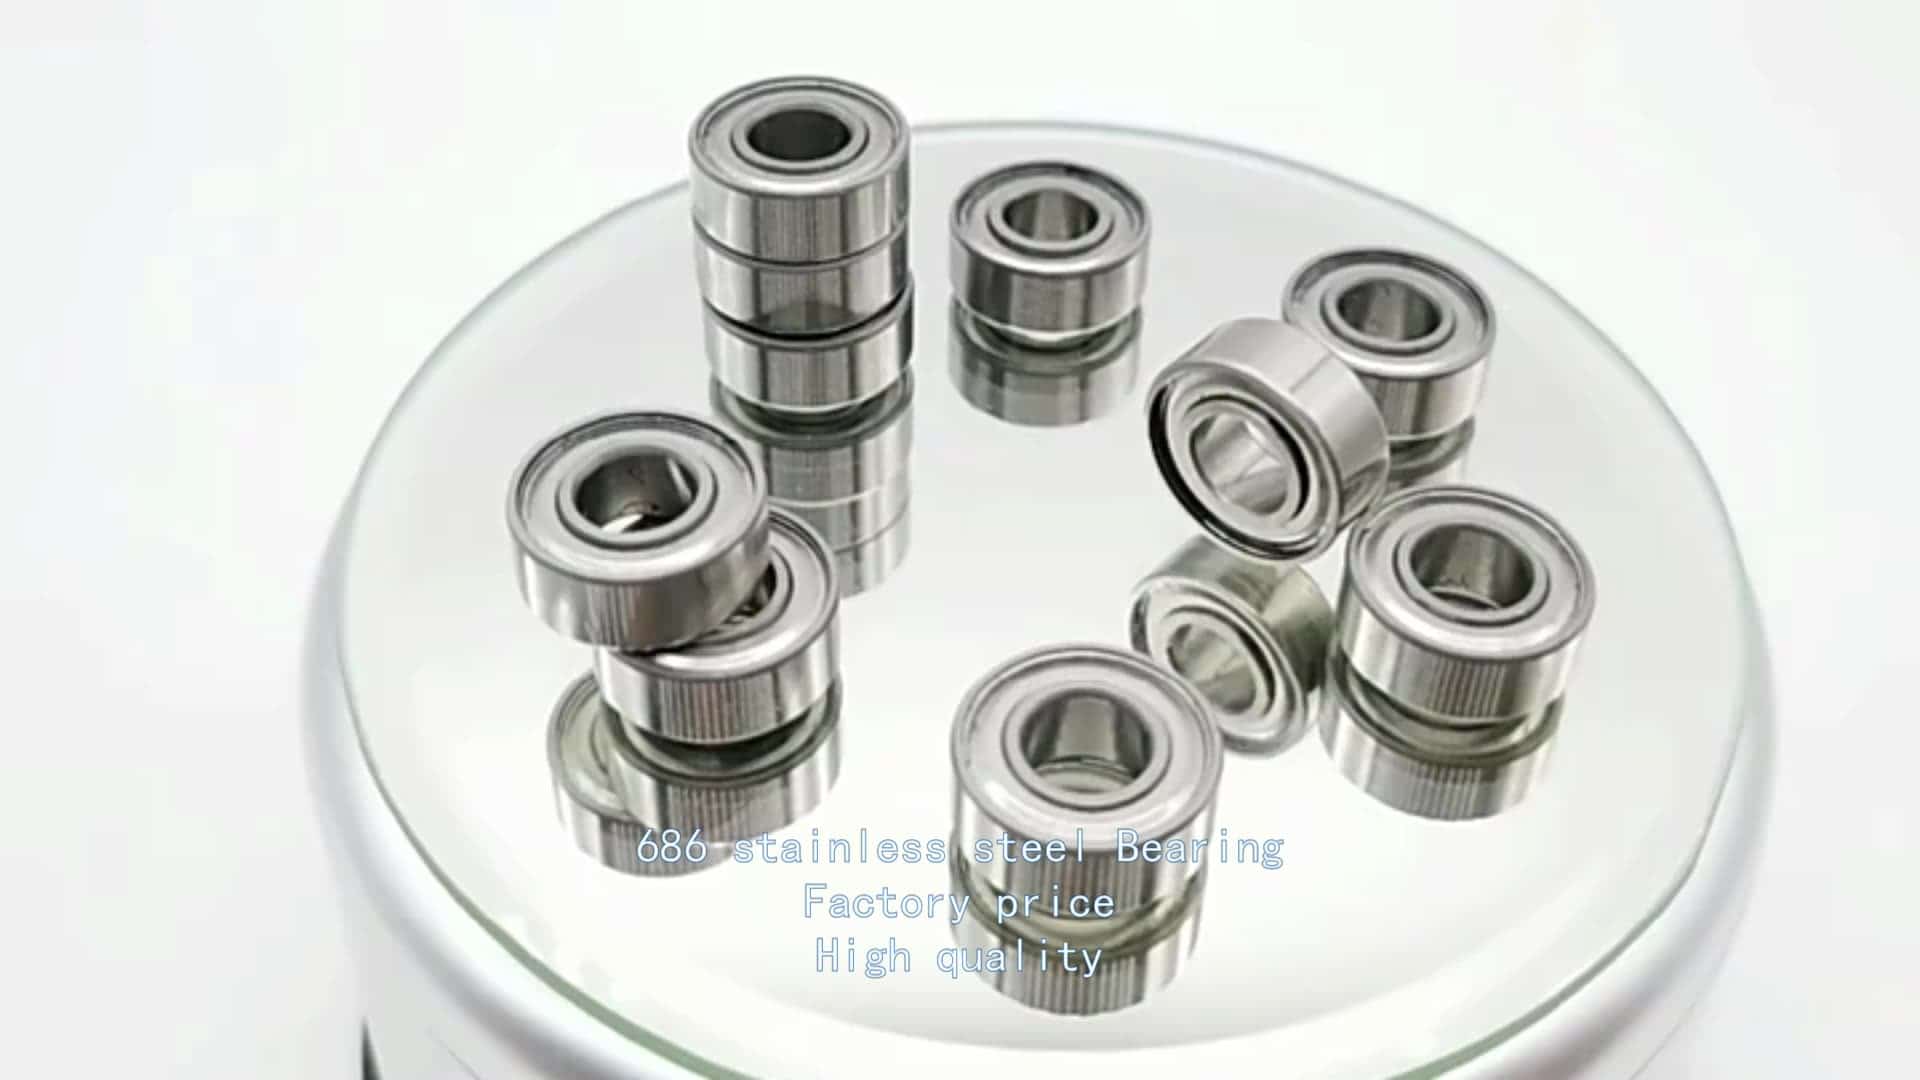 SMR84ZZ 440 stainless steel miniature bearing for Fishing Tackle